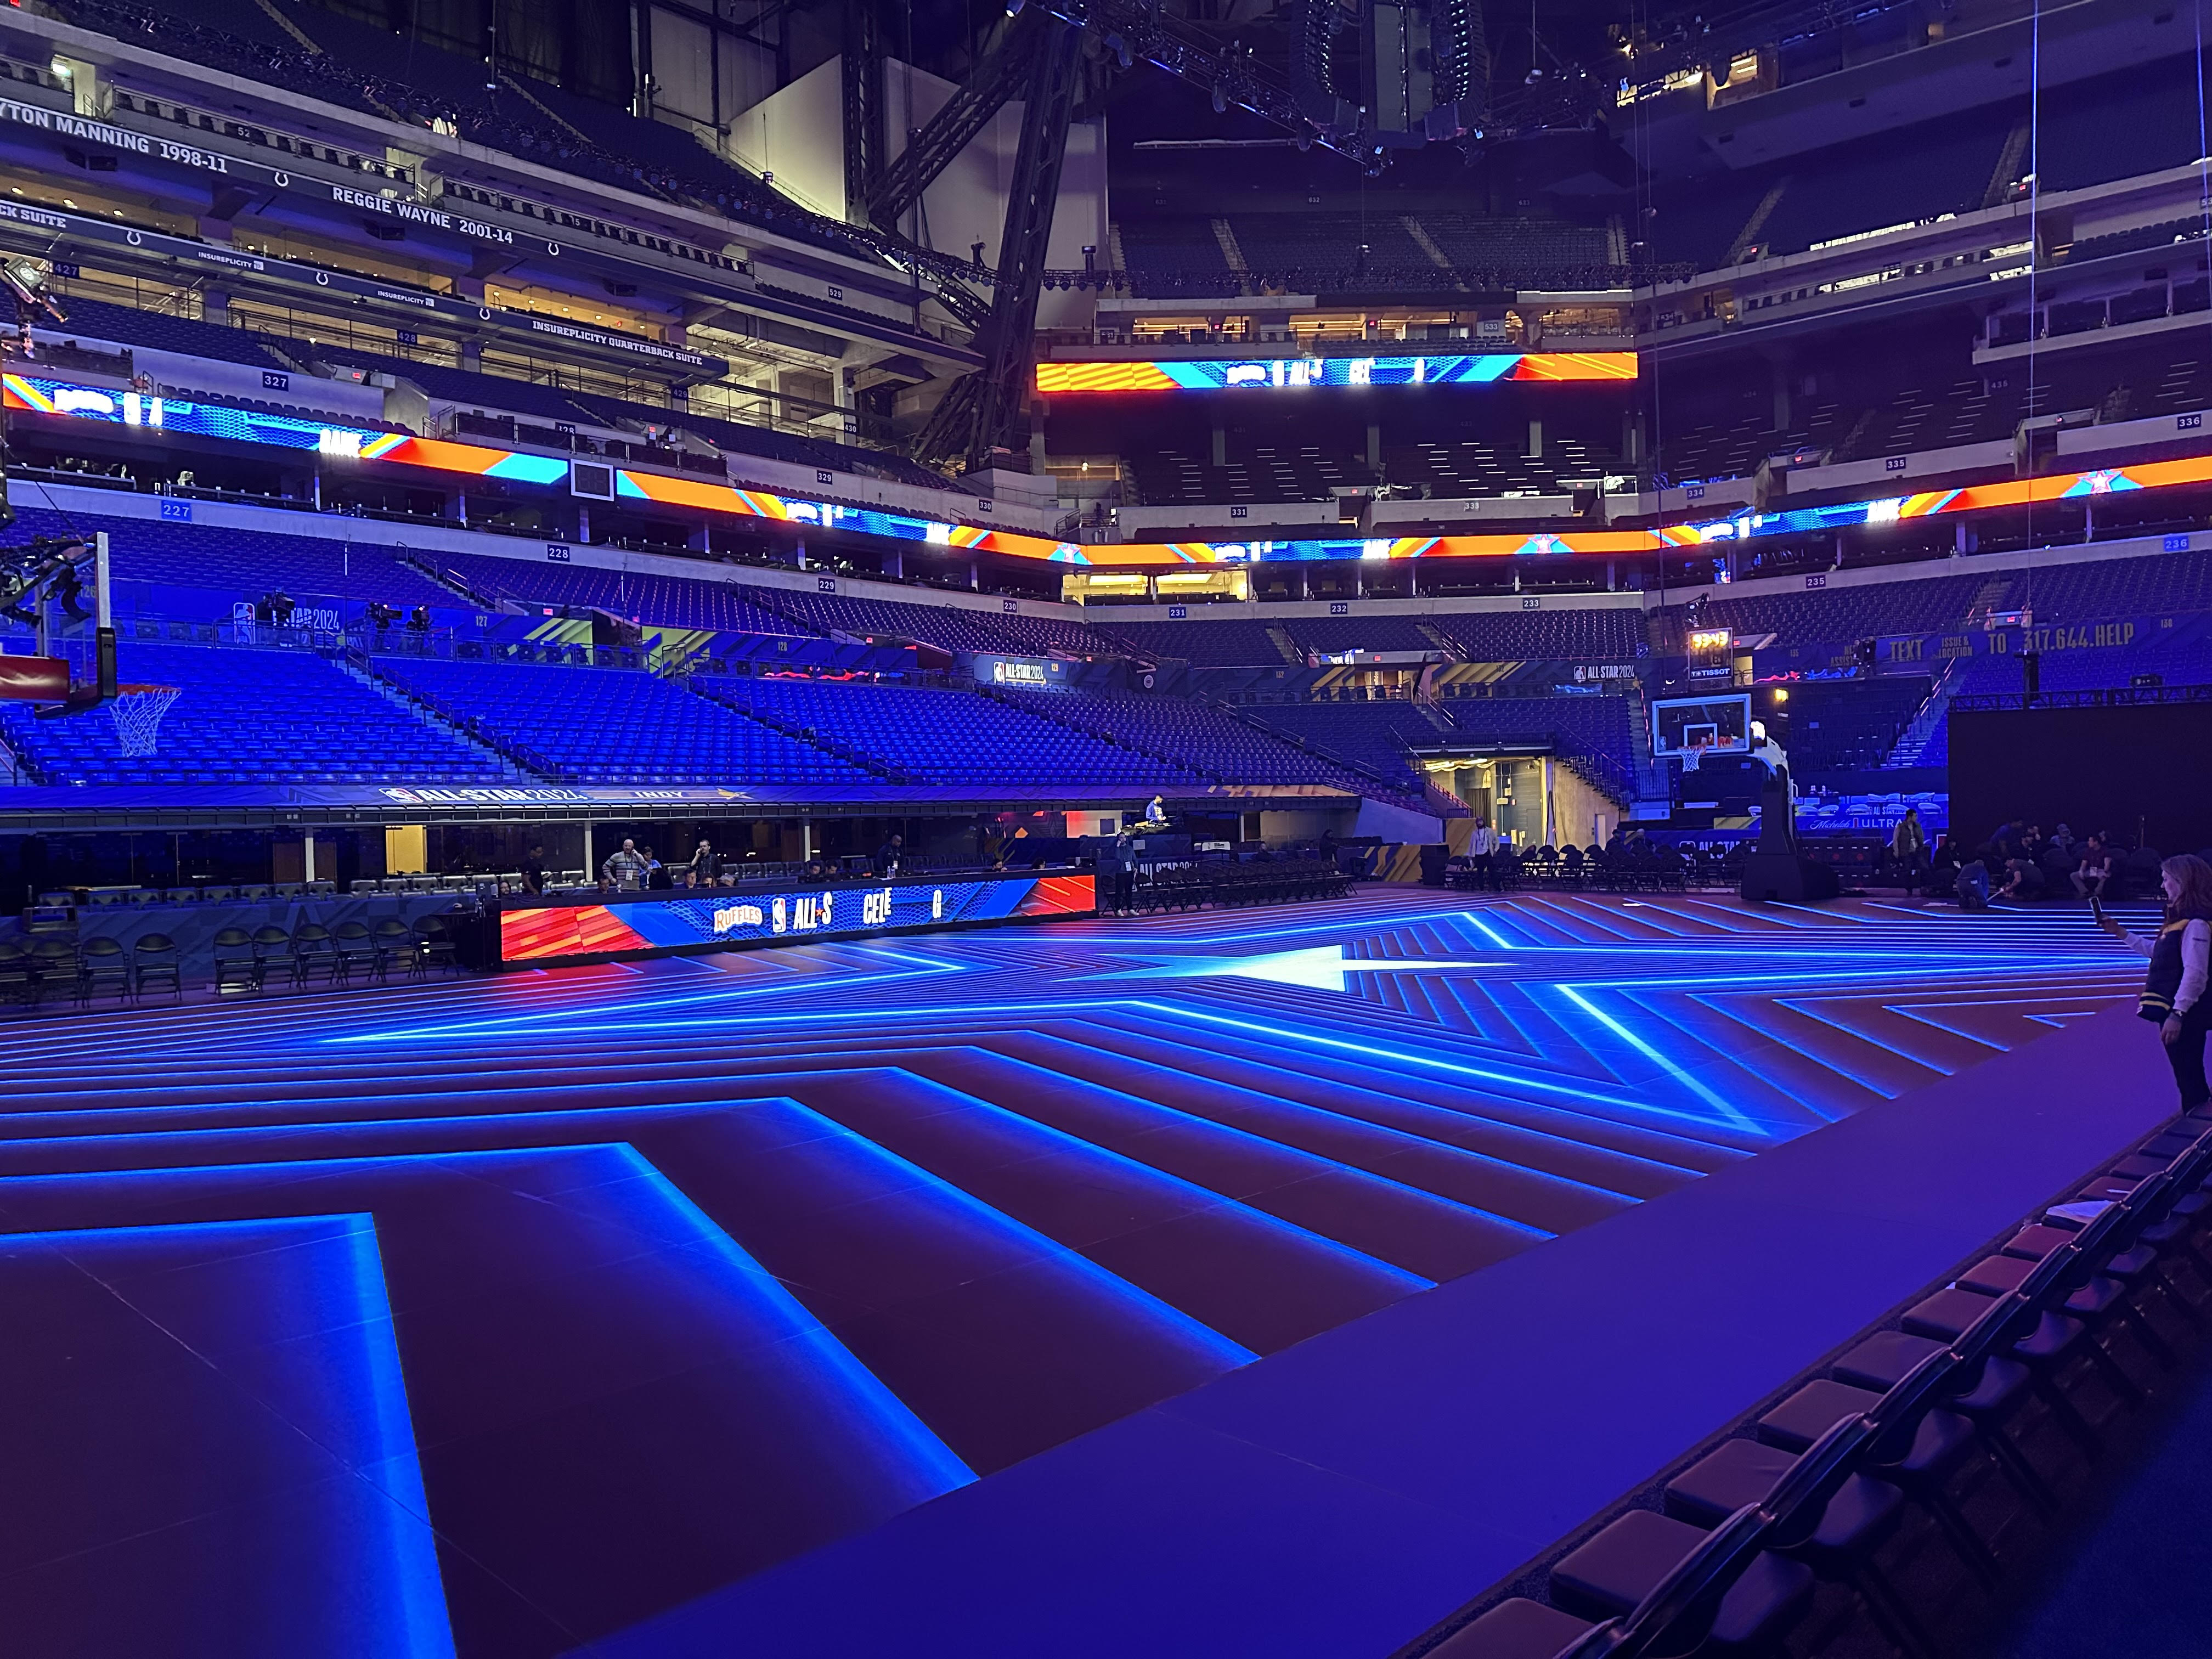 Image of NBA LED Court in Indianapolis